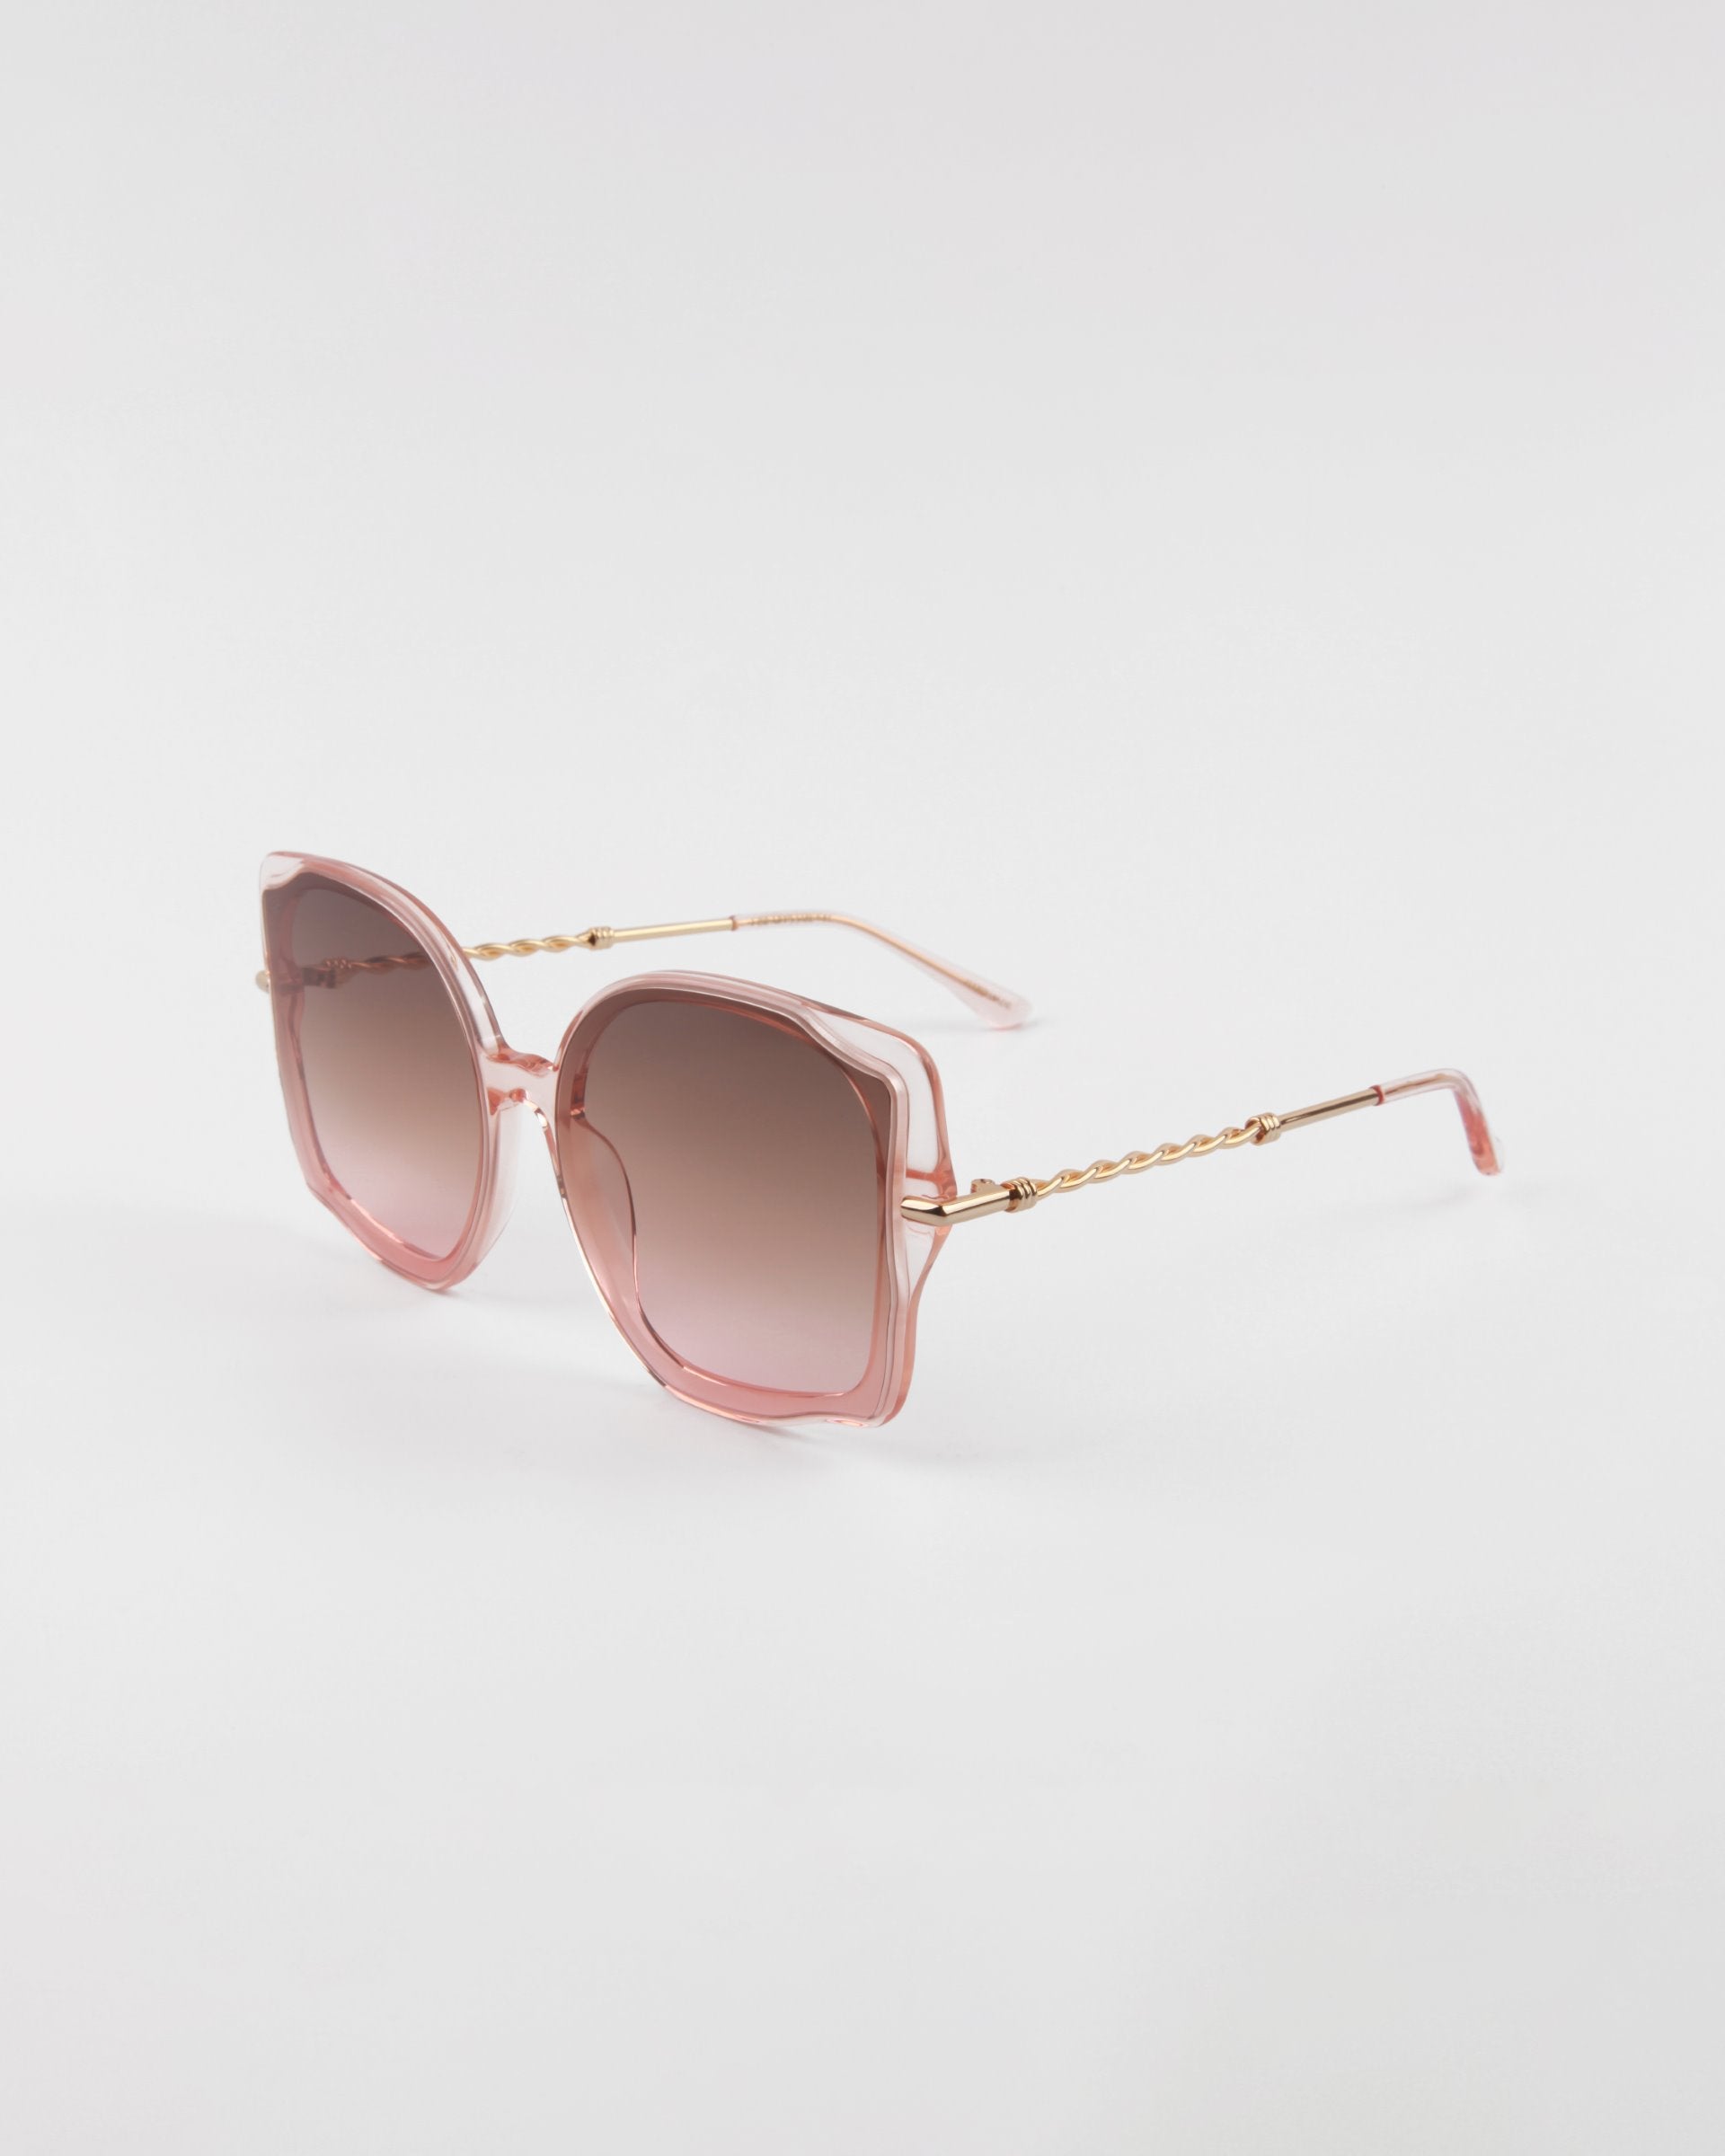 Square-shaped, oversized frame Fahrenheit sunglasses by For Art&#39;s Sake® with pink gradient lenses and a light pink metal frame, featuring thin 18-karat gold-plated arms with a chain-like design. The Fahrenheit sunglasses by For Art&#39;s Sake® are placed on a plain white background.